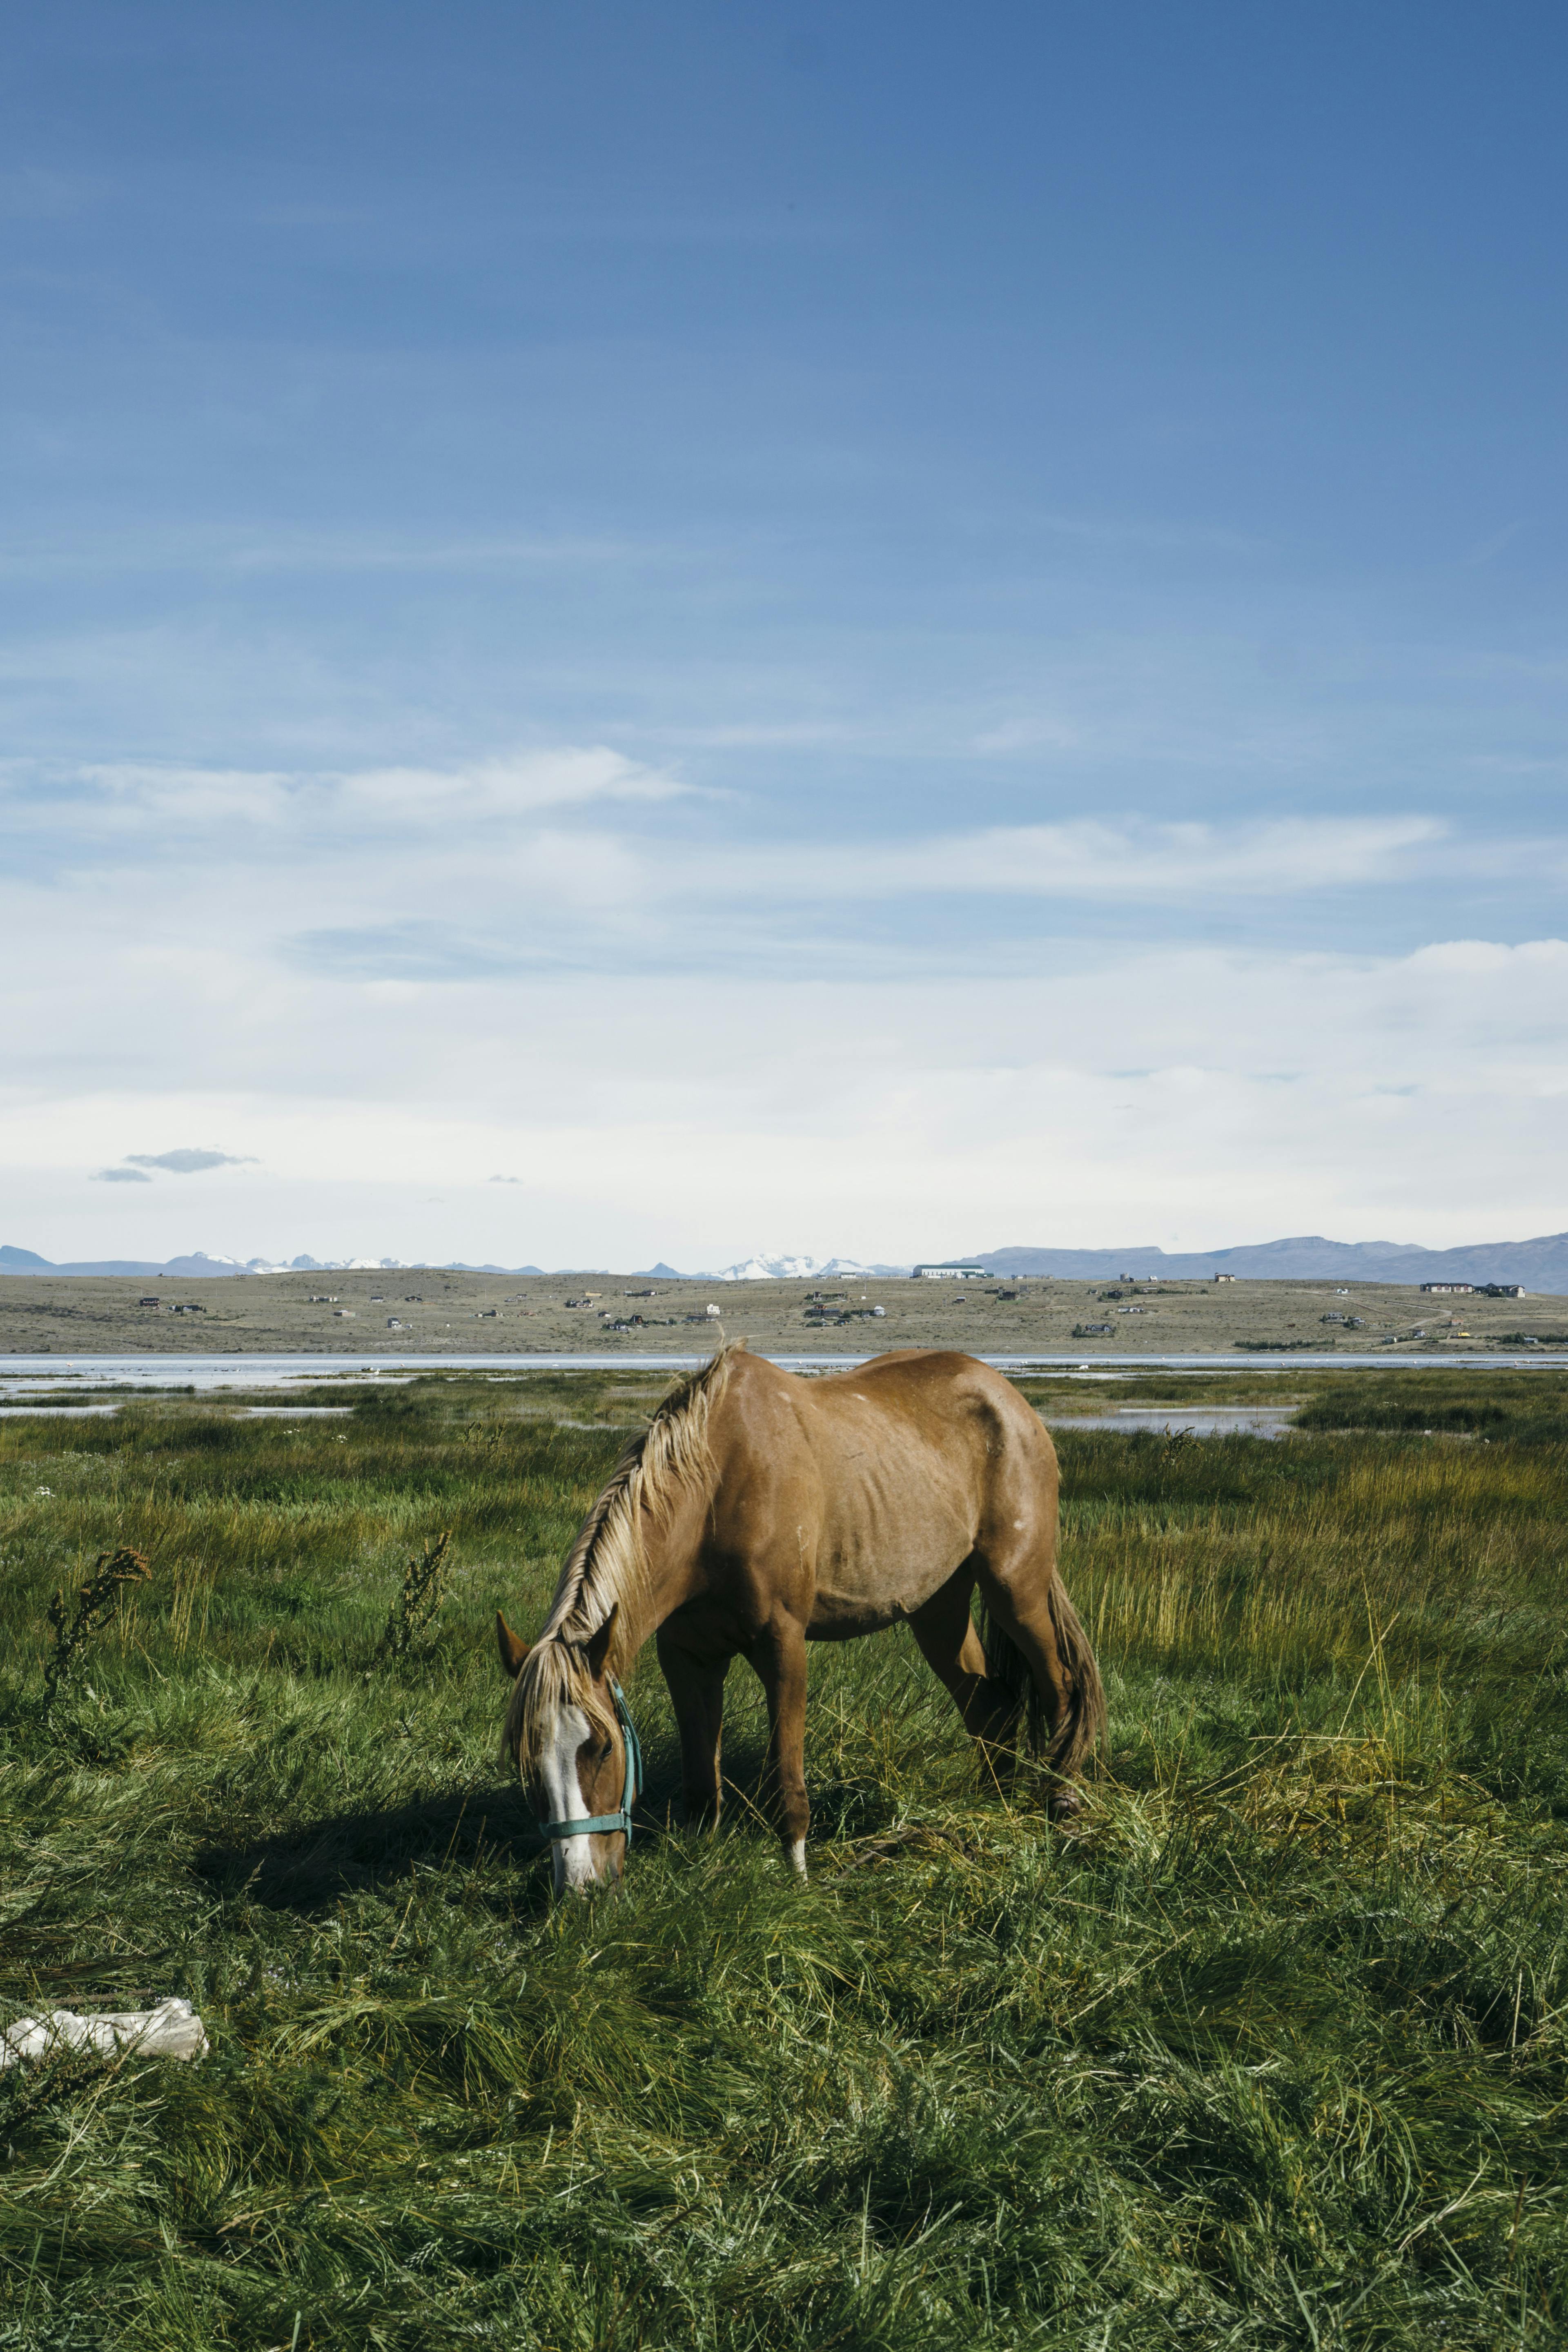 A brown horse eating grass on a sunny day. In the distant background, an earthy hill is peppered with small buildings, just beyond a shallow body of water.